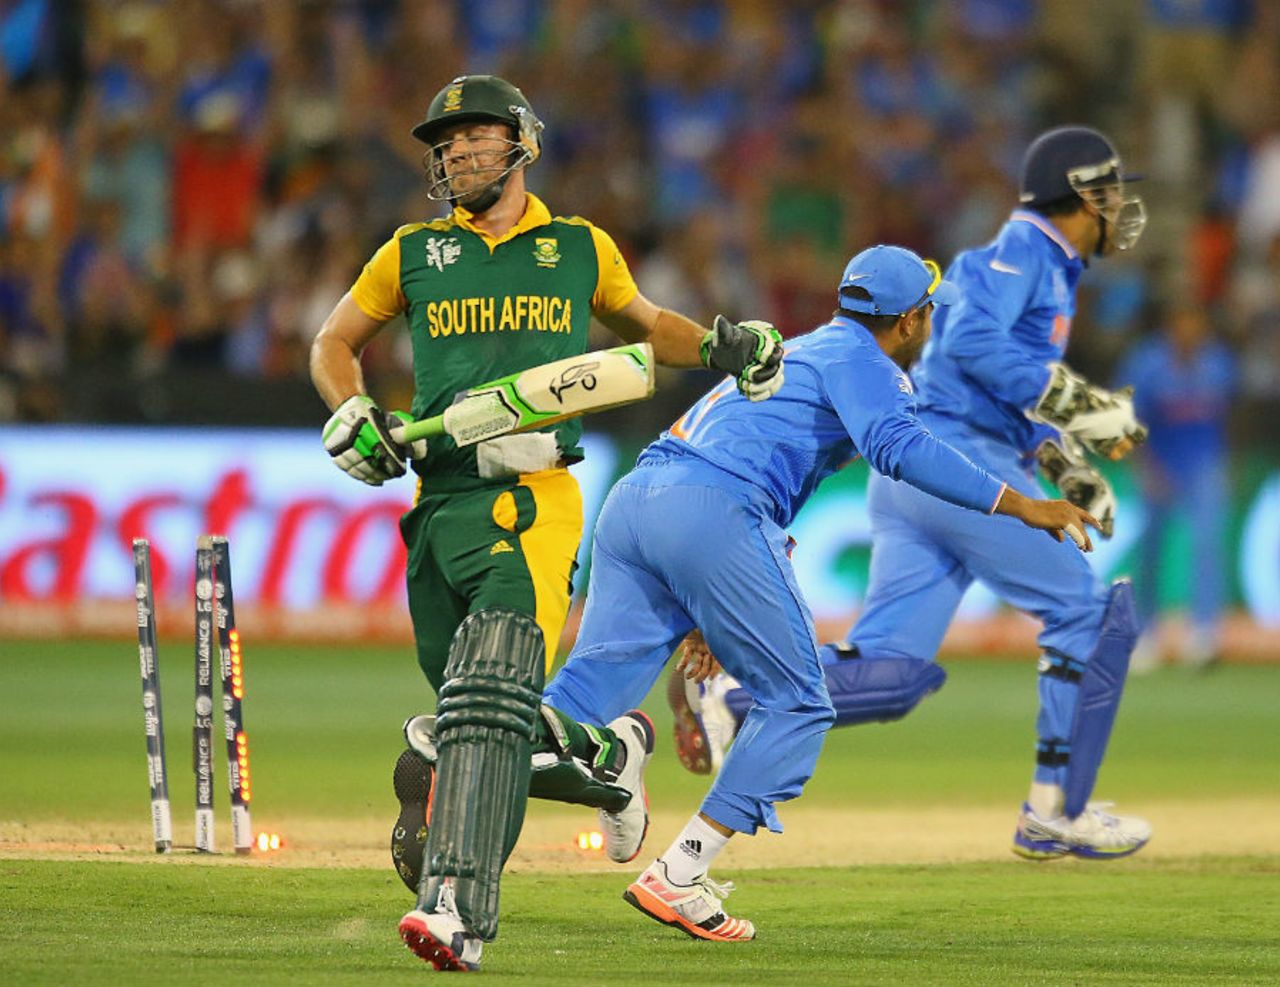 AB de Villiers' run out sparked wild celebrations, India v South Africa, World Cup 2015, Group B, Melbourne, February 22, 2015